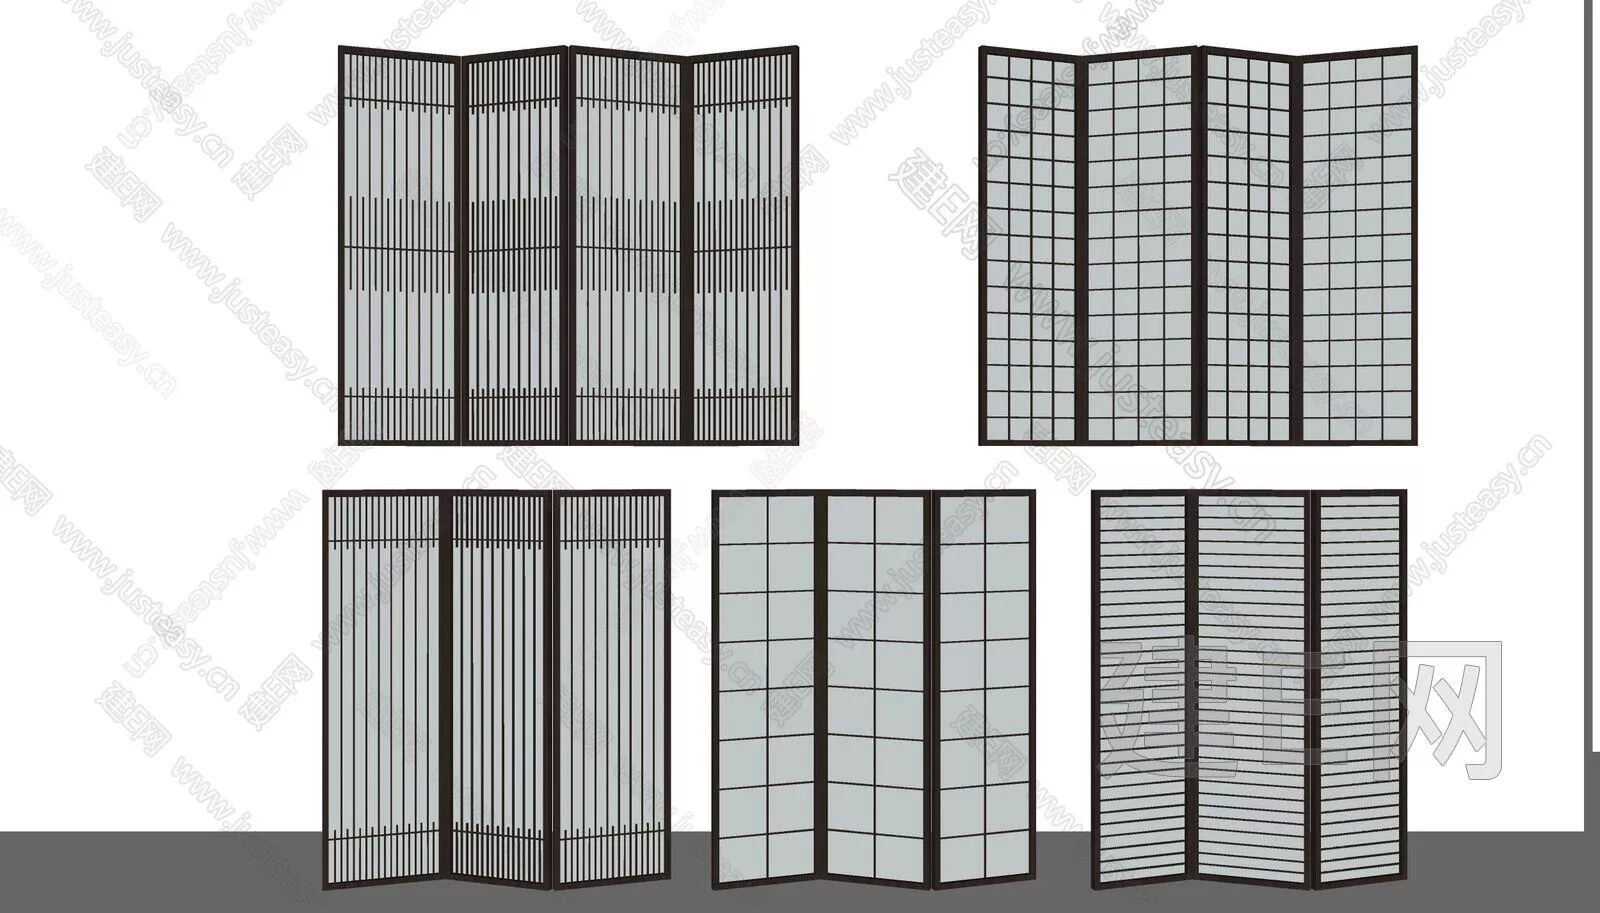 CHINESE PARTITION SCREEN - SKETCHUP 3D MODEL - ENSCAPE - 112214493